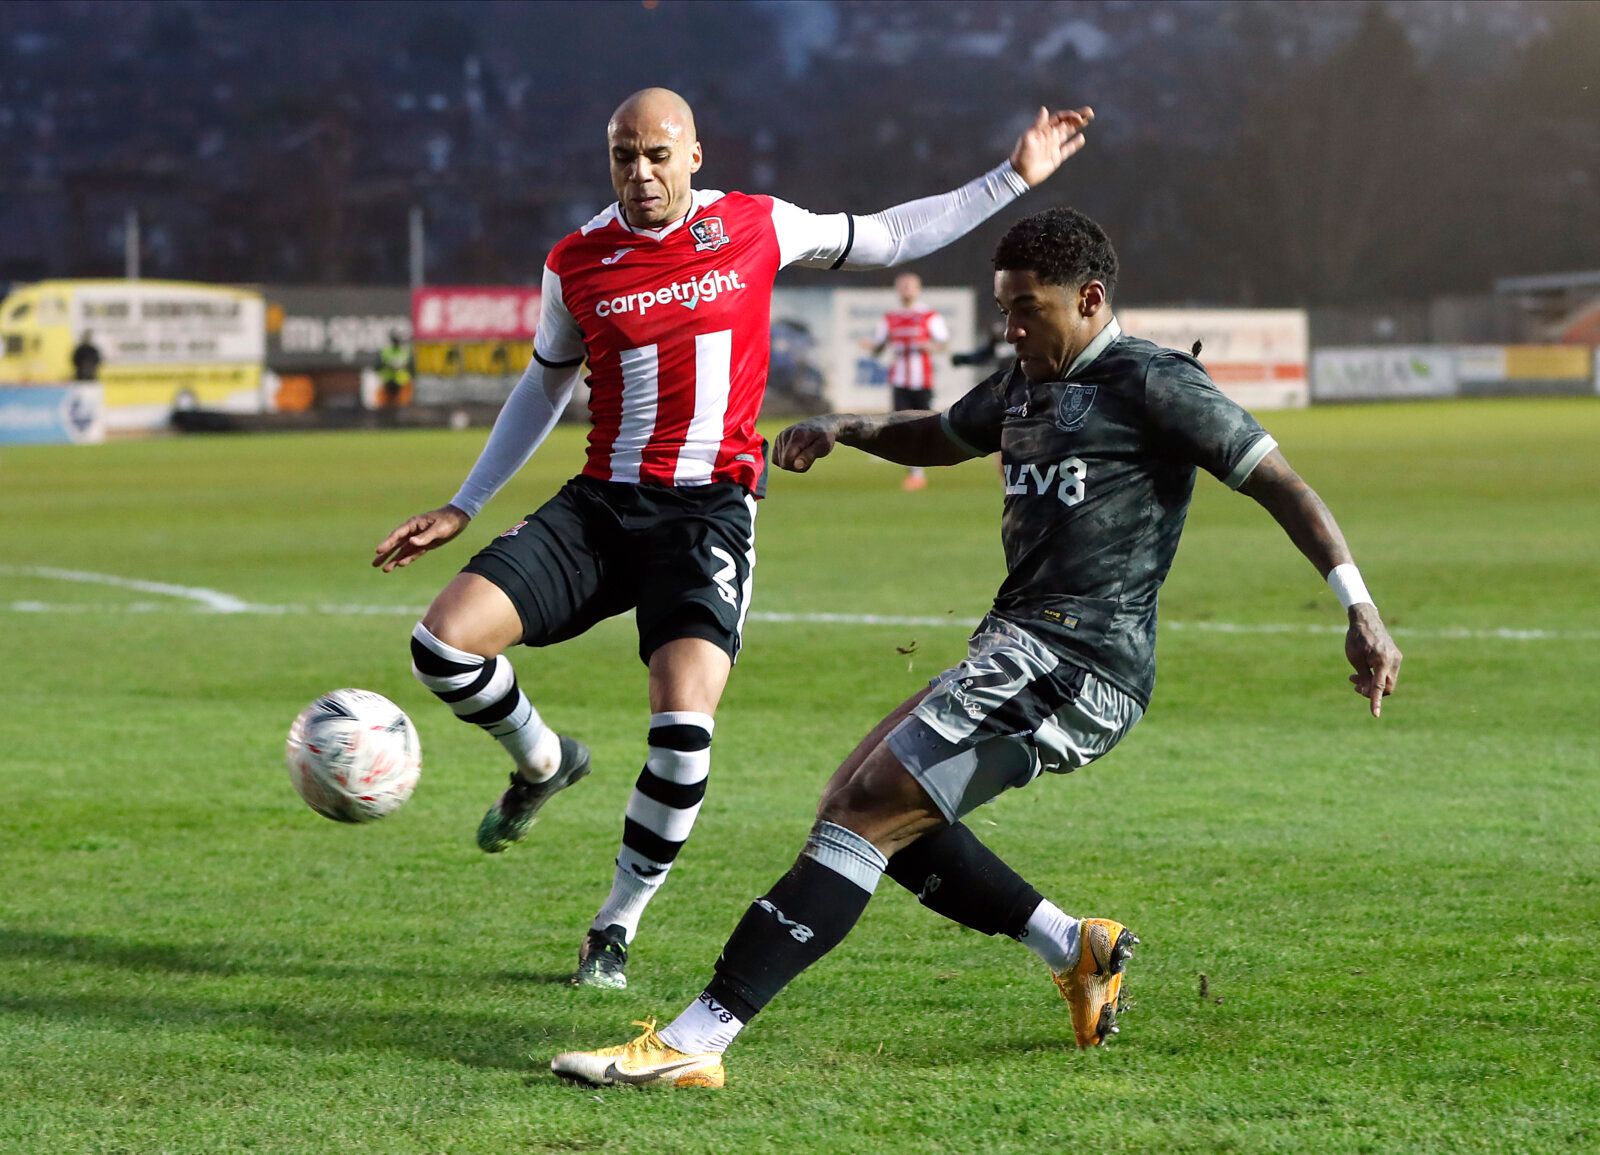 Soccer Football - FA Cup - Third Round - Exeter City v Sheffield Wednesday - St James Park, Exeter, Britain - January 9, 2021  Sheffield Wednesday's Kadeem Harris in action with Exeter City's Jake Caprice Action Images via Reuters/Paul Childs